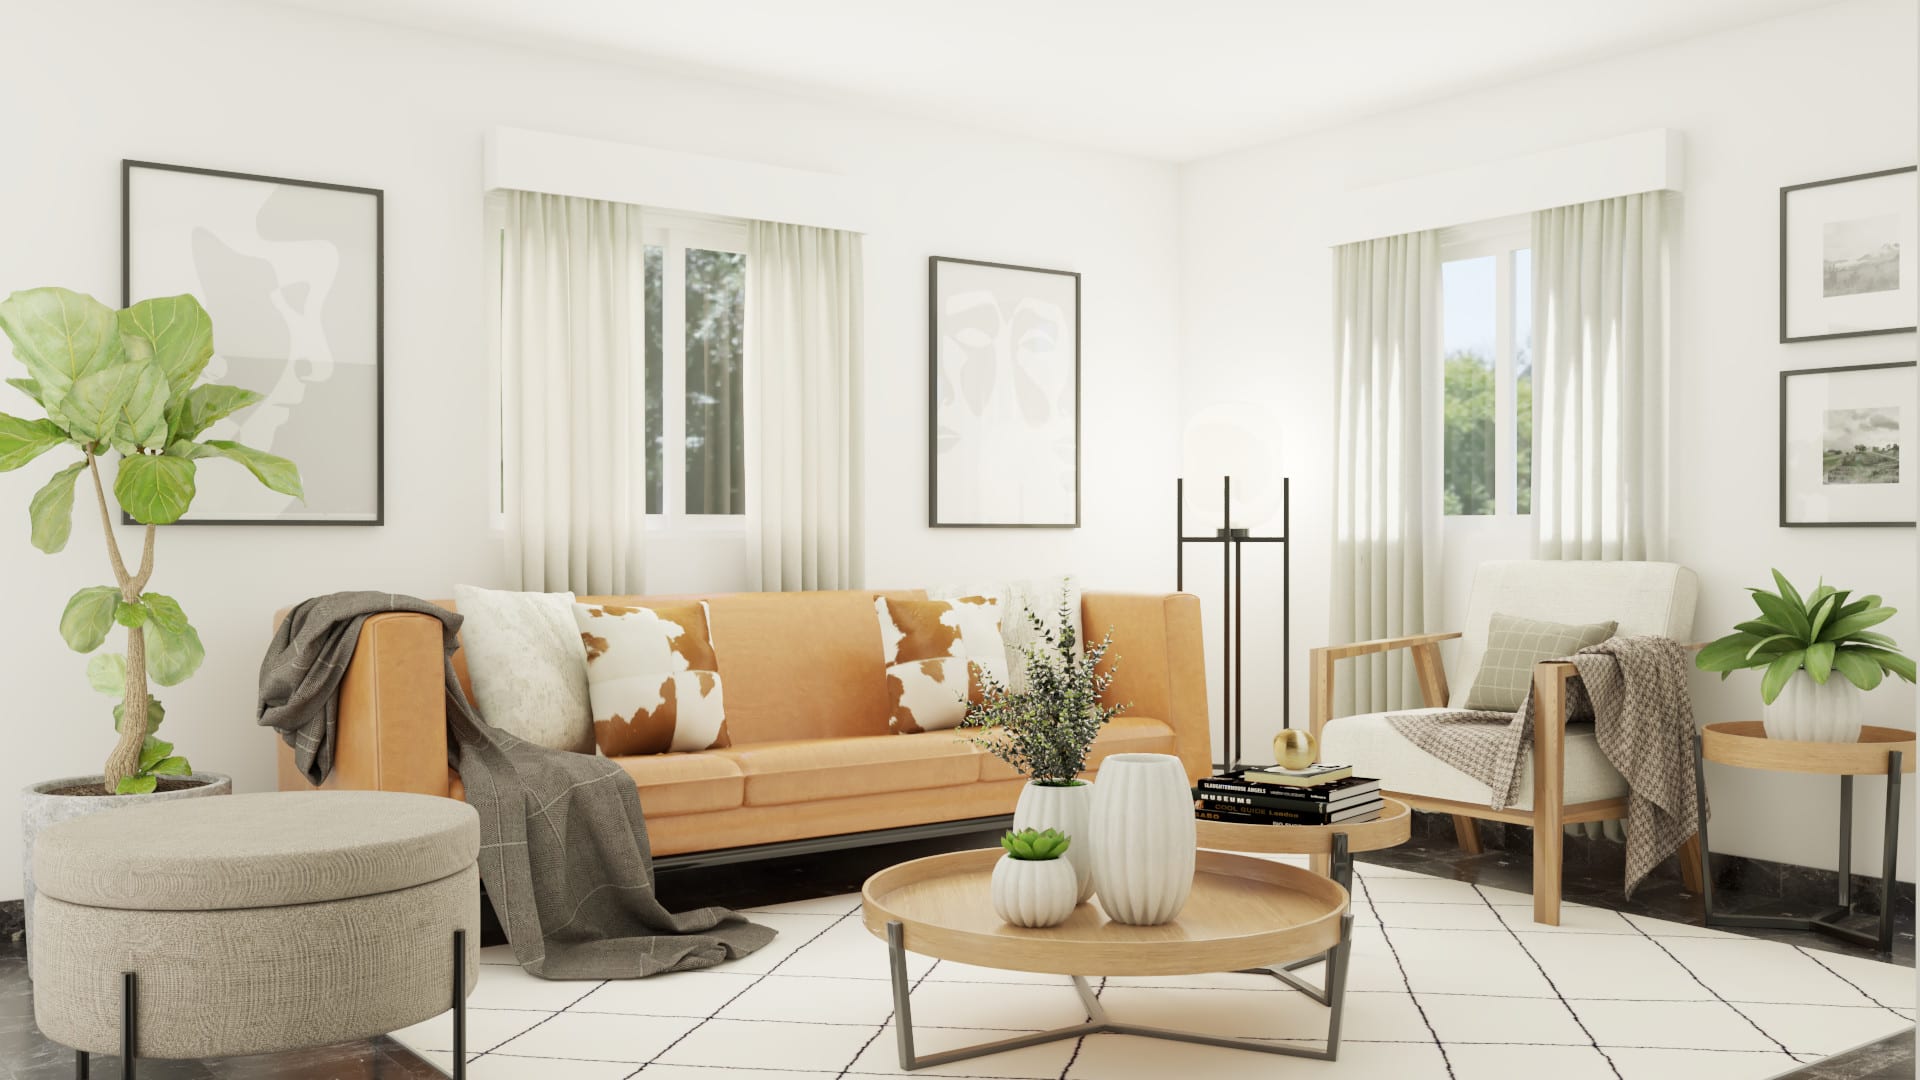 ‍13 Best 3D Interior Design Software for Photorealistic Rendering